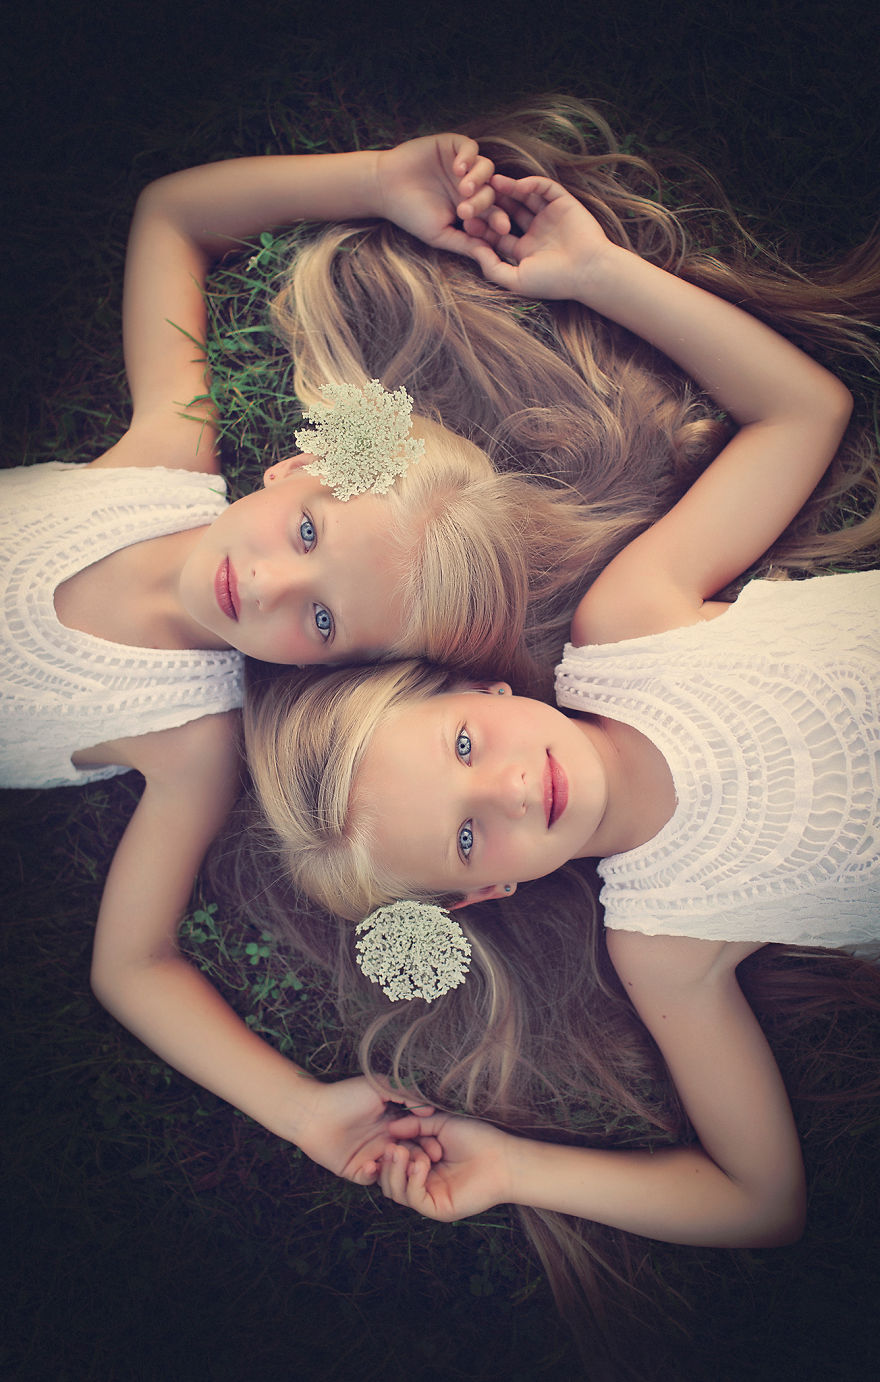 The Other Half: I Photograph Twins And These Photos Have A Special Place In My Heart